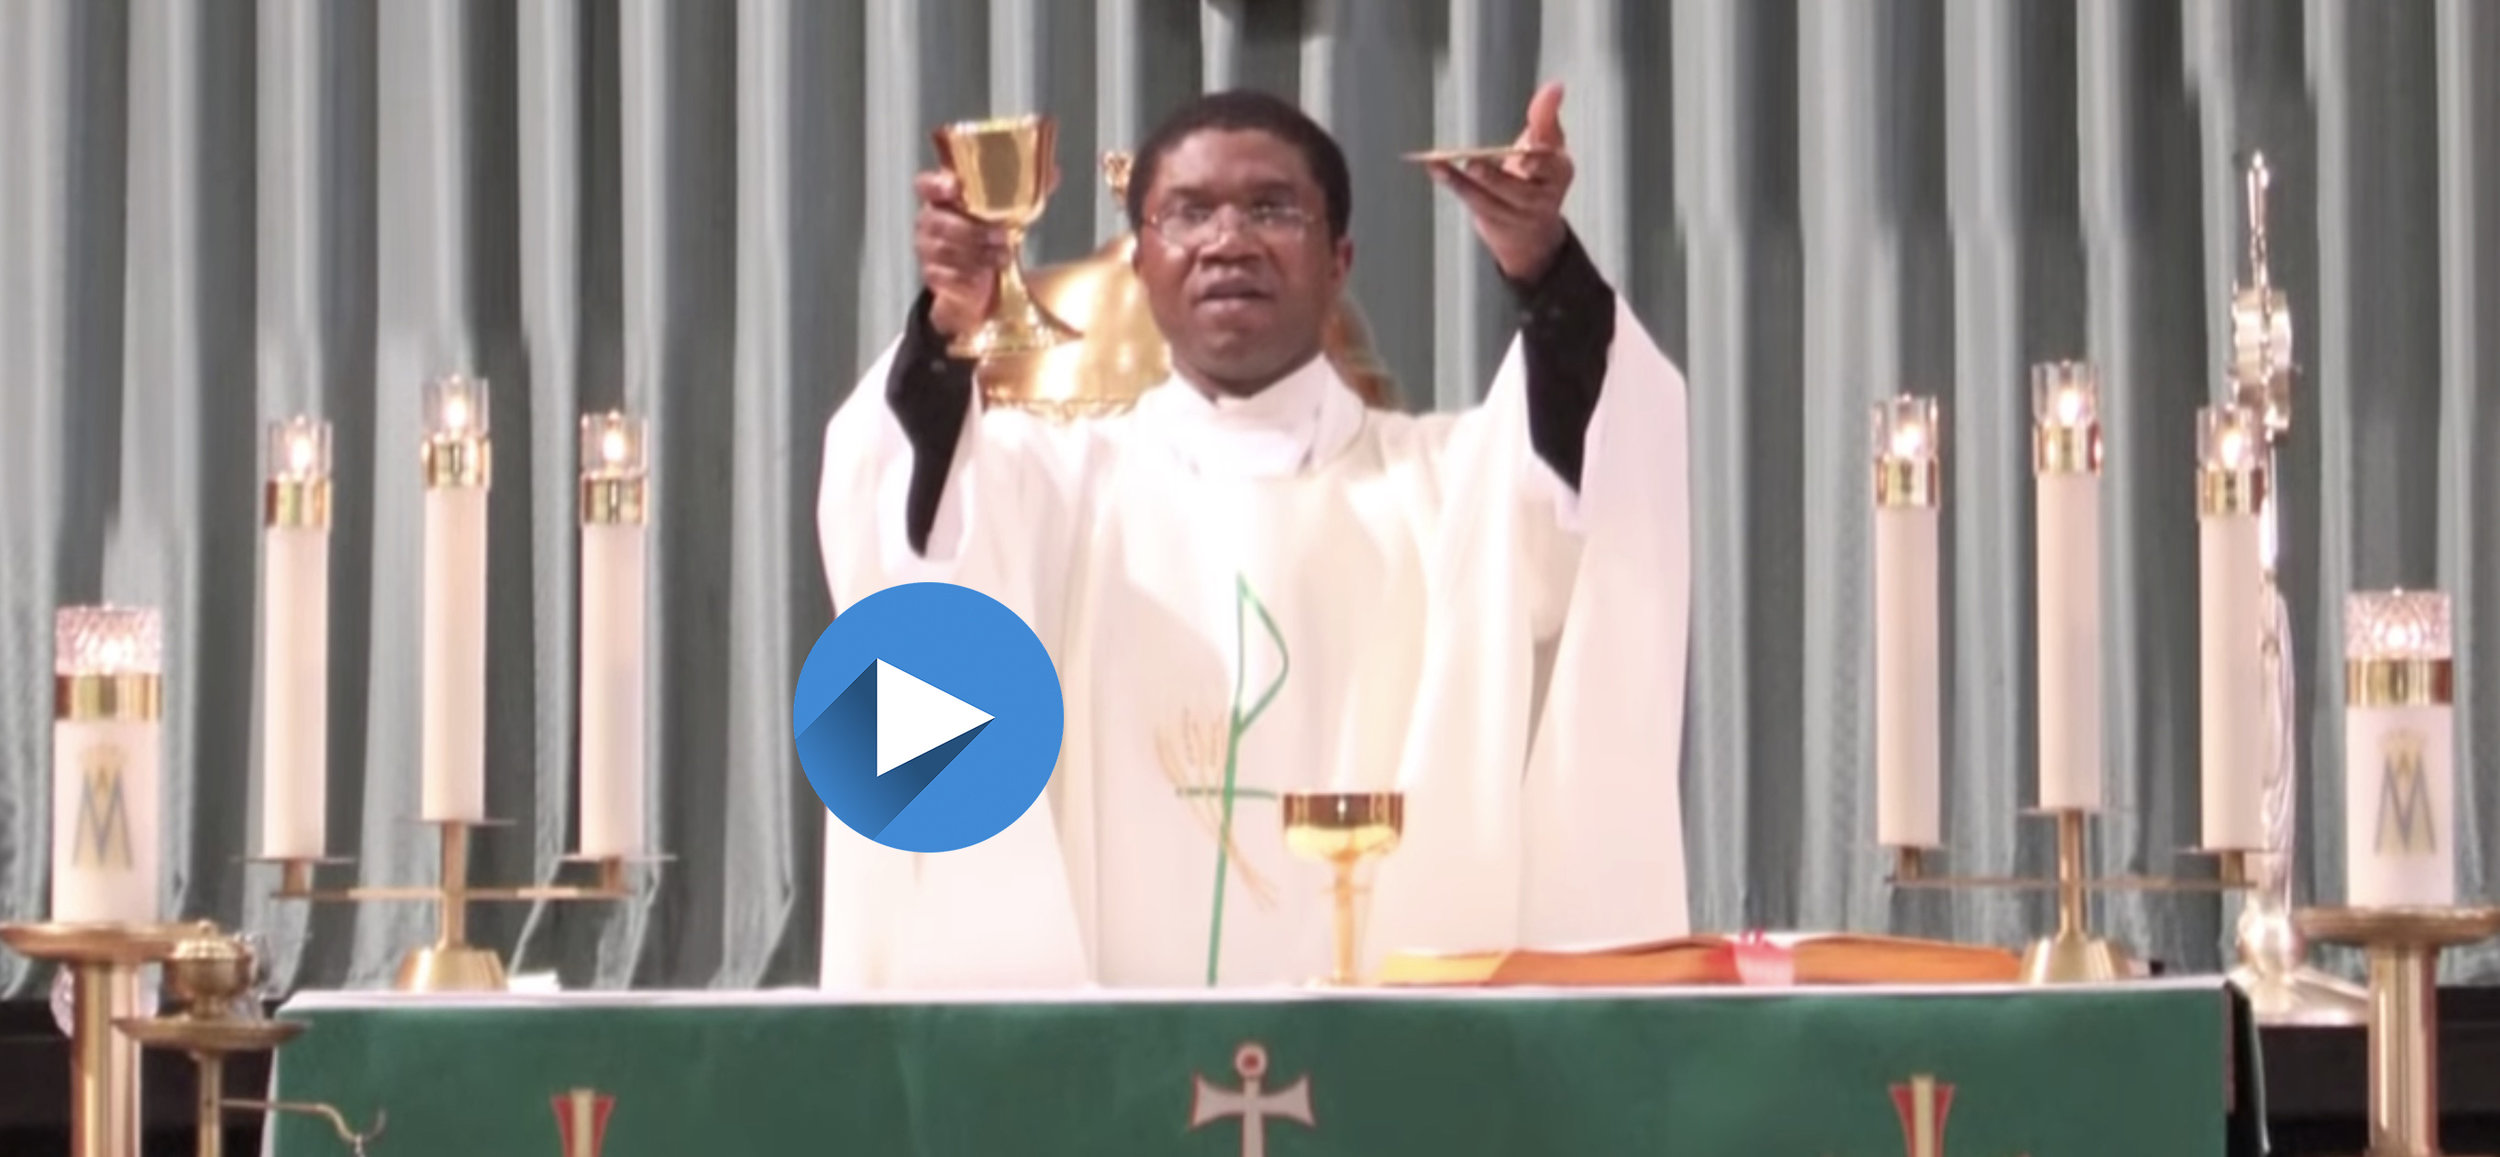 EUCHARIST VIDEO 2 COVER with arrow .jpg